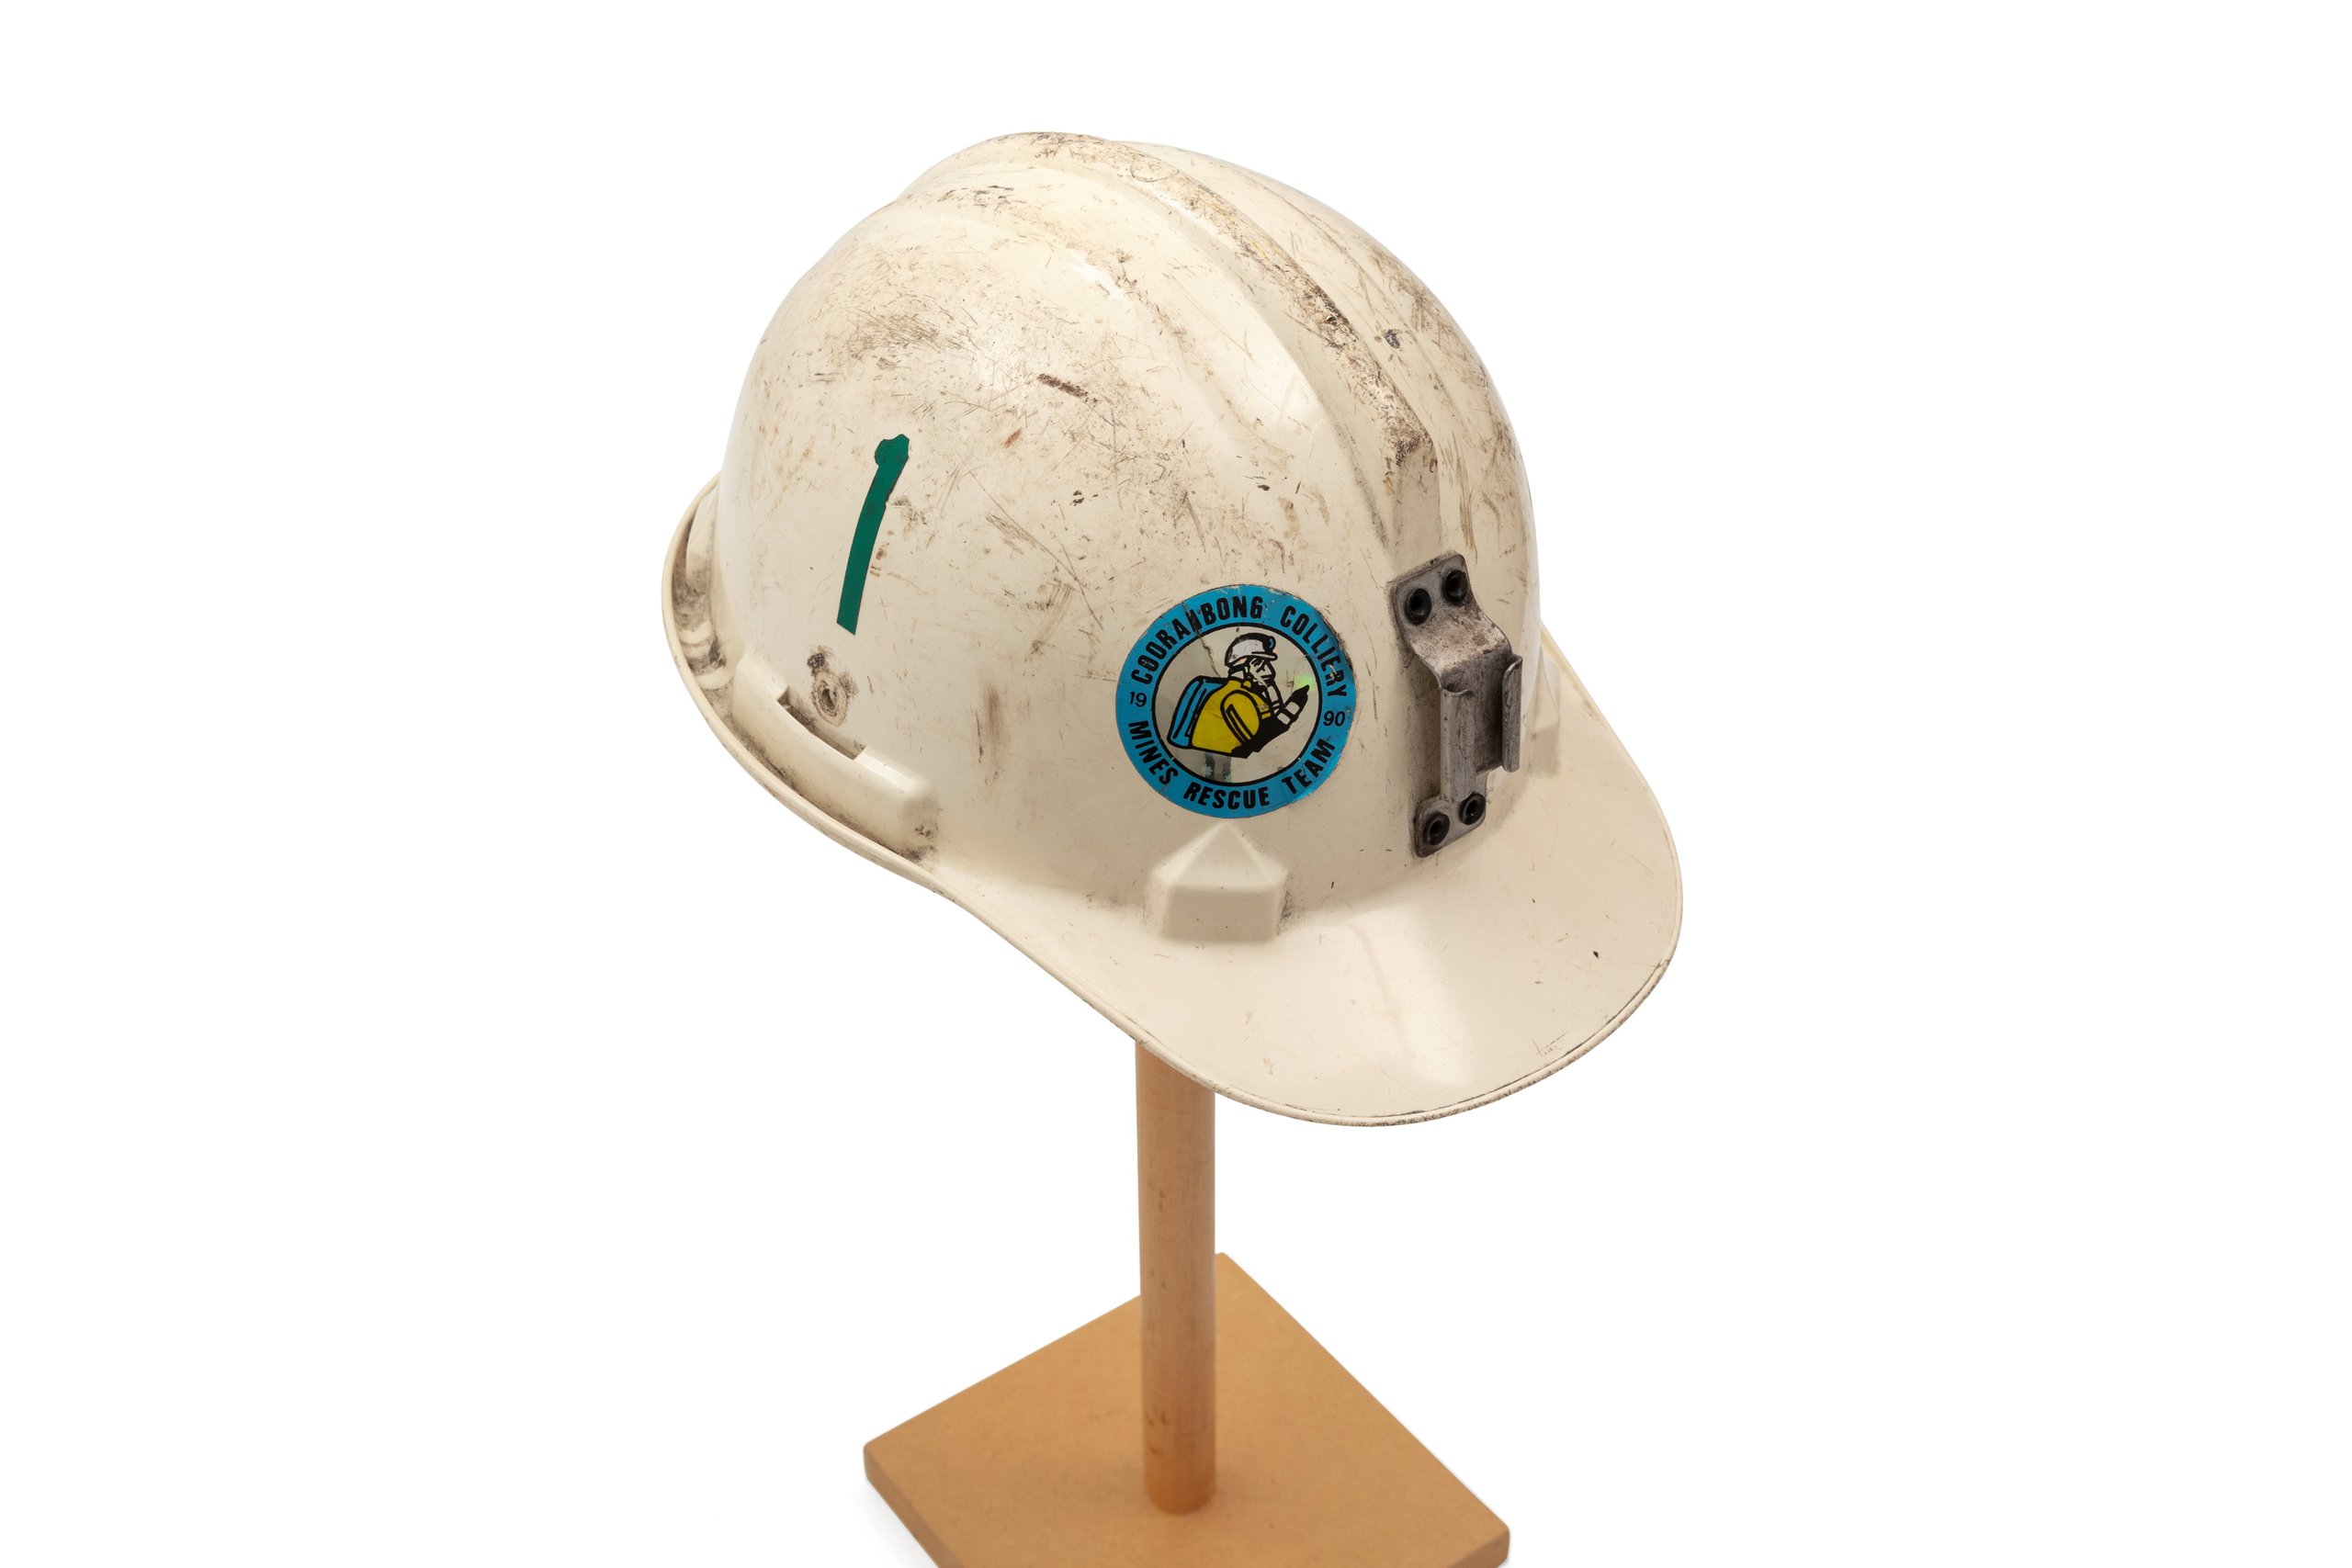 Miners safety helmet by Protector Safety